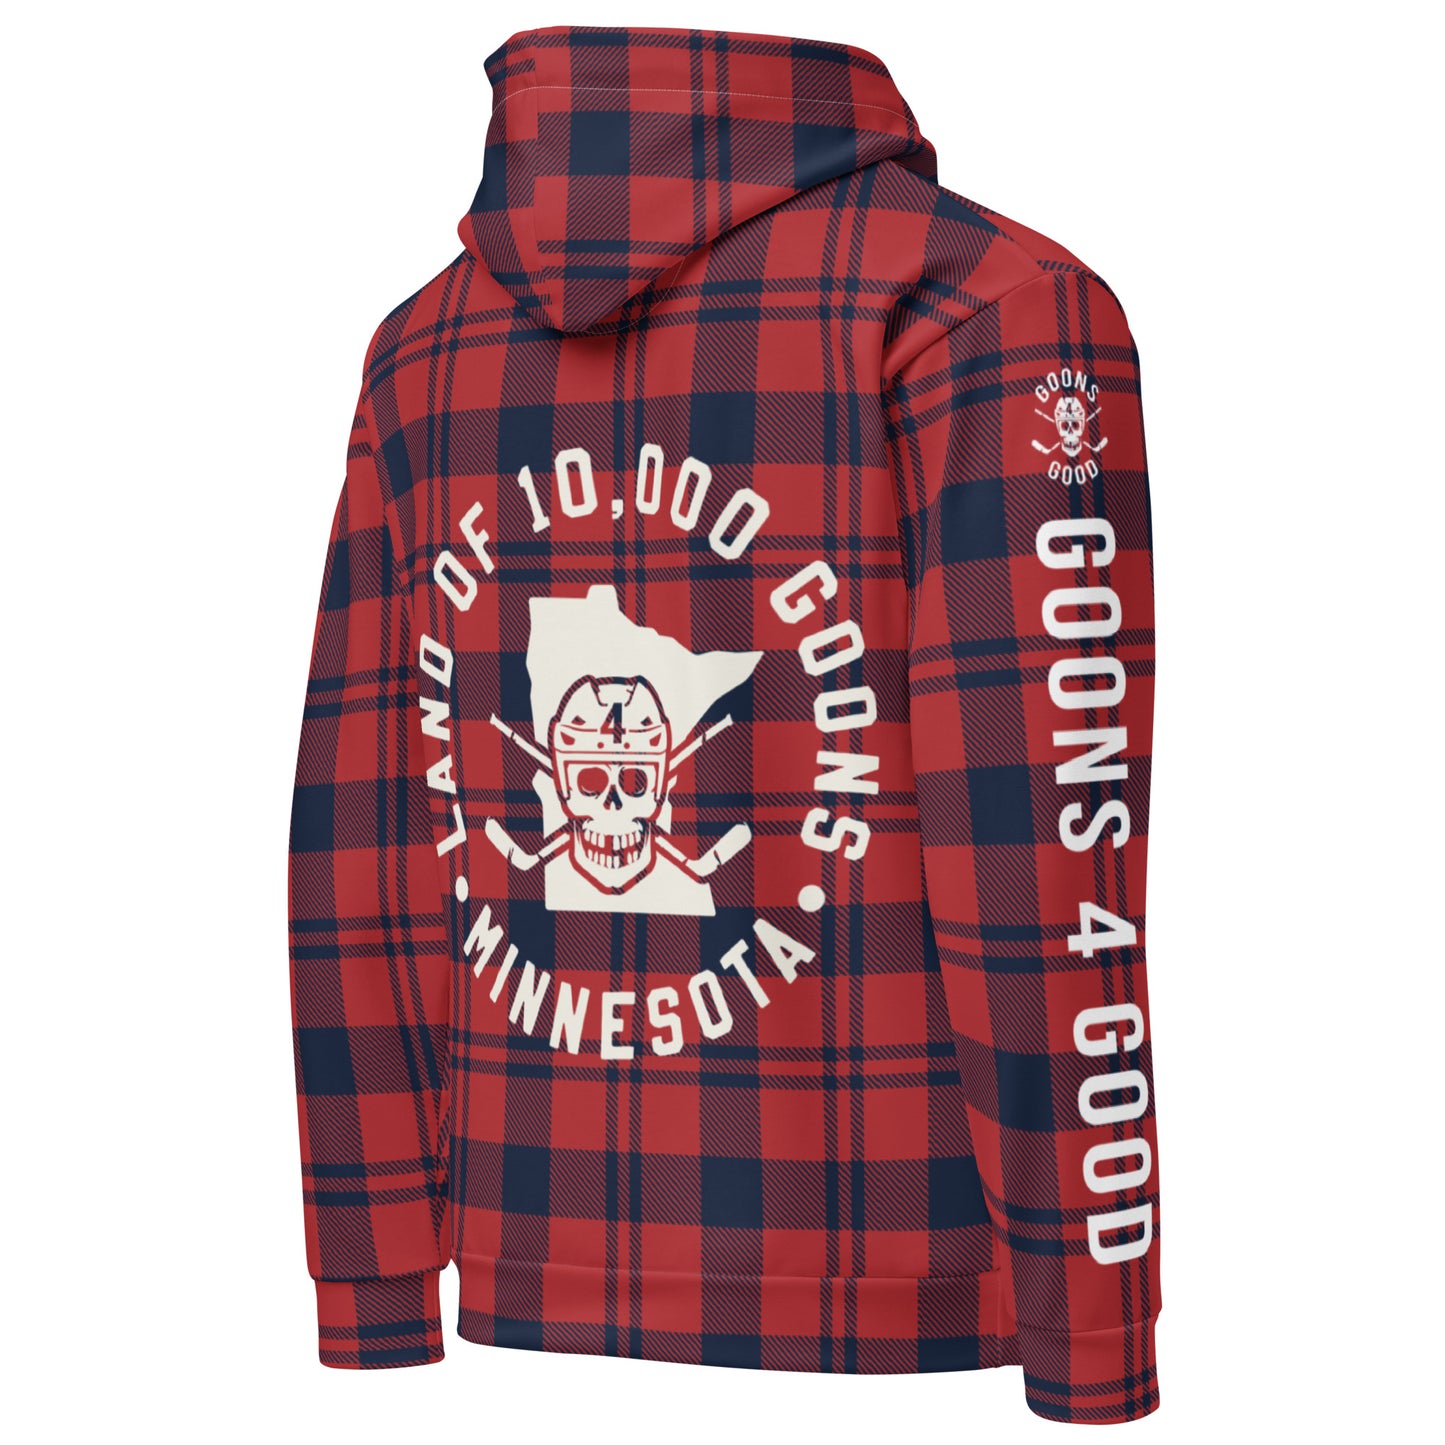 LAND OF GOONS I MIDWEIGHT HOODIE